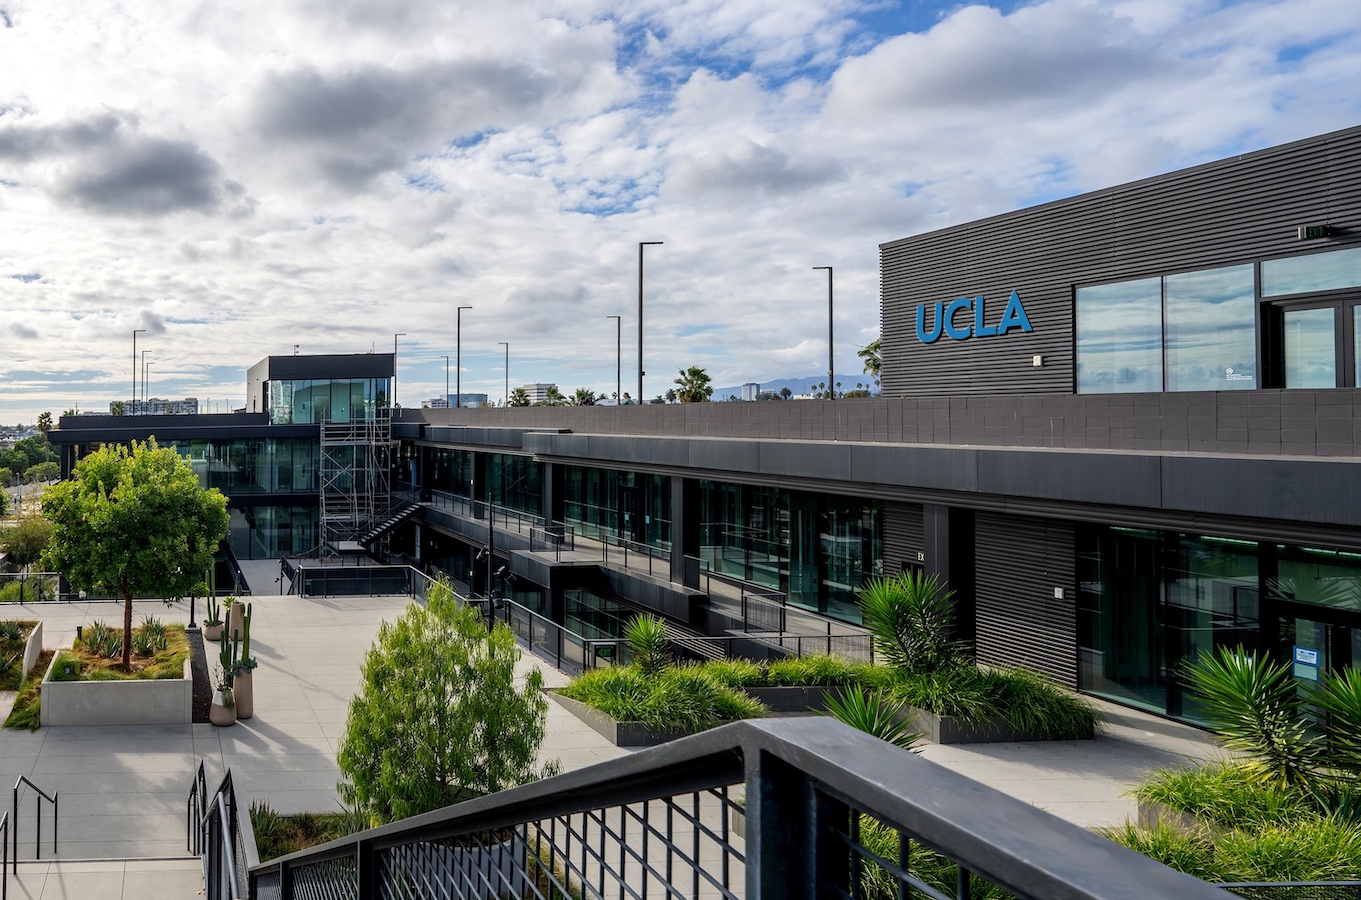 Exterior of the shopping mall with bushes, envisioned with UCLA logos on it